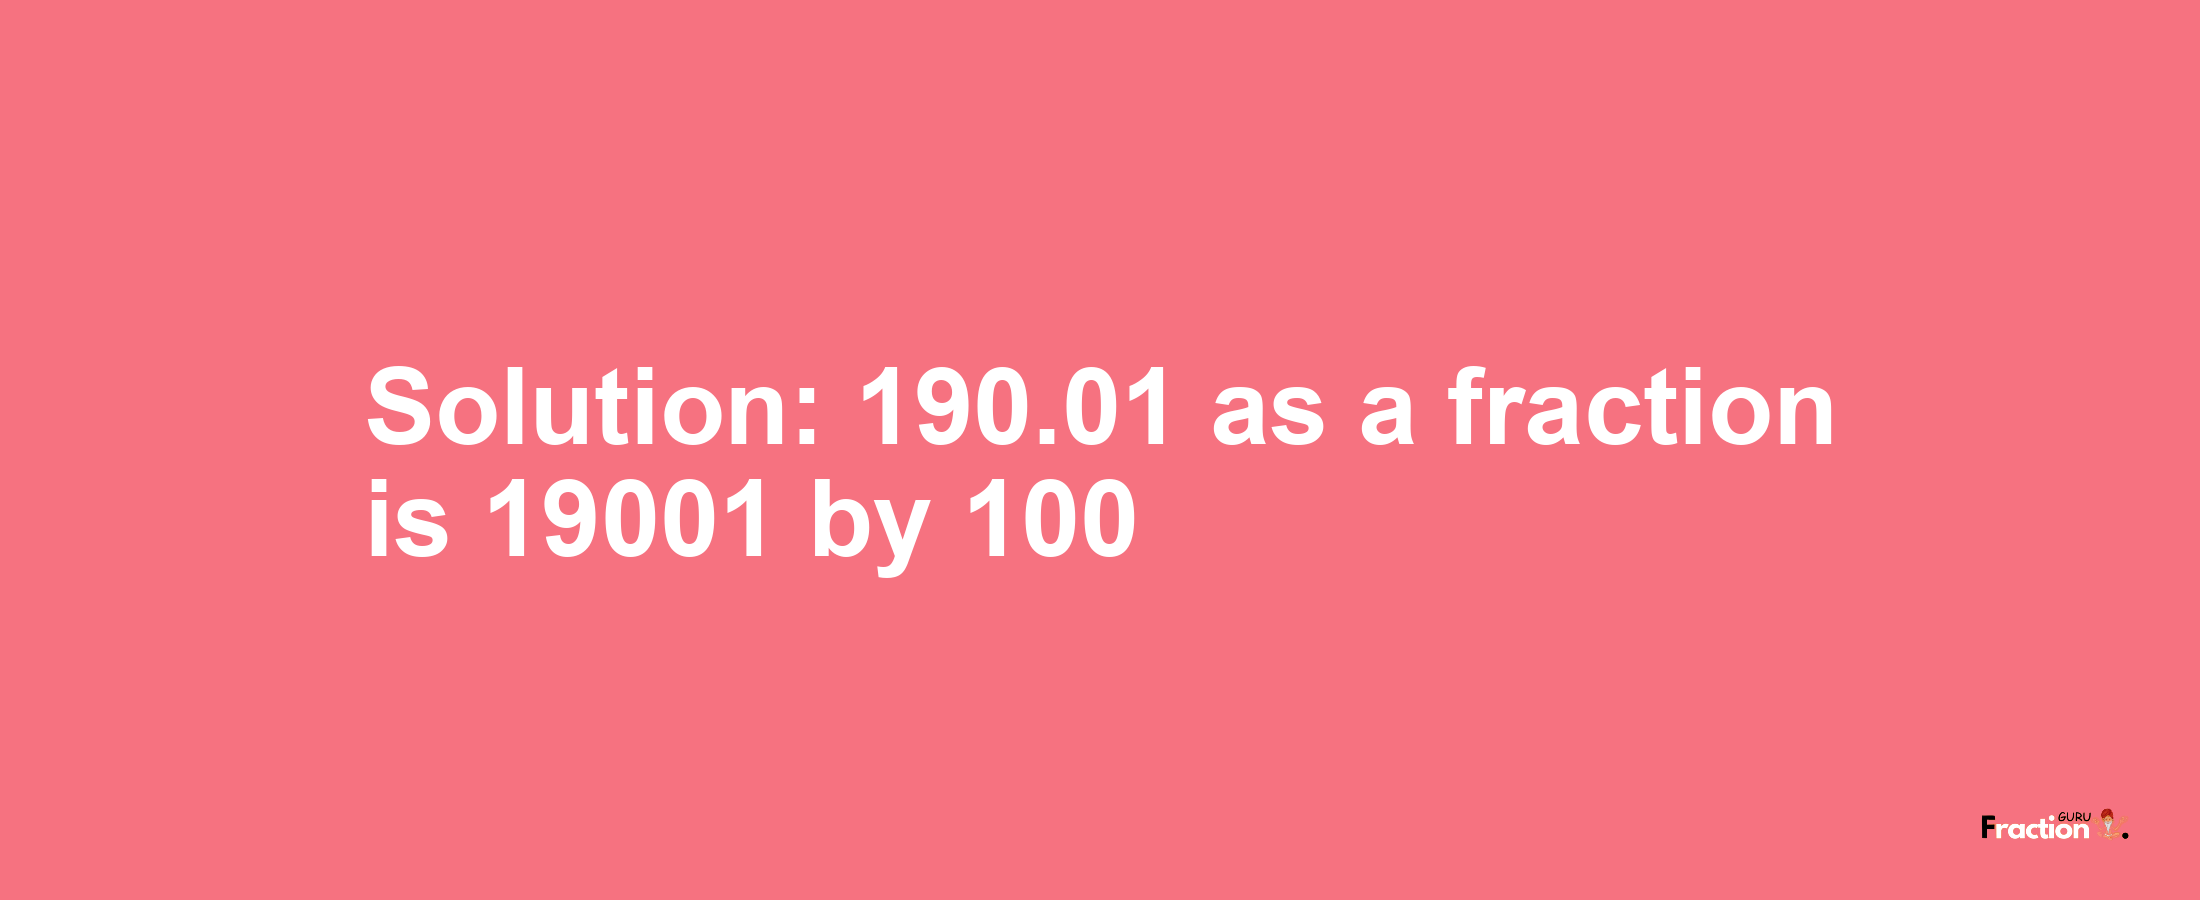 Solution:190.01 as a fraction is 19001/100